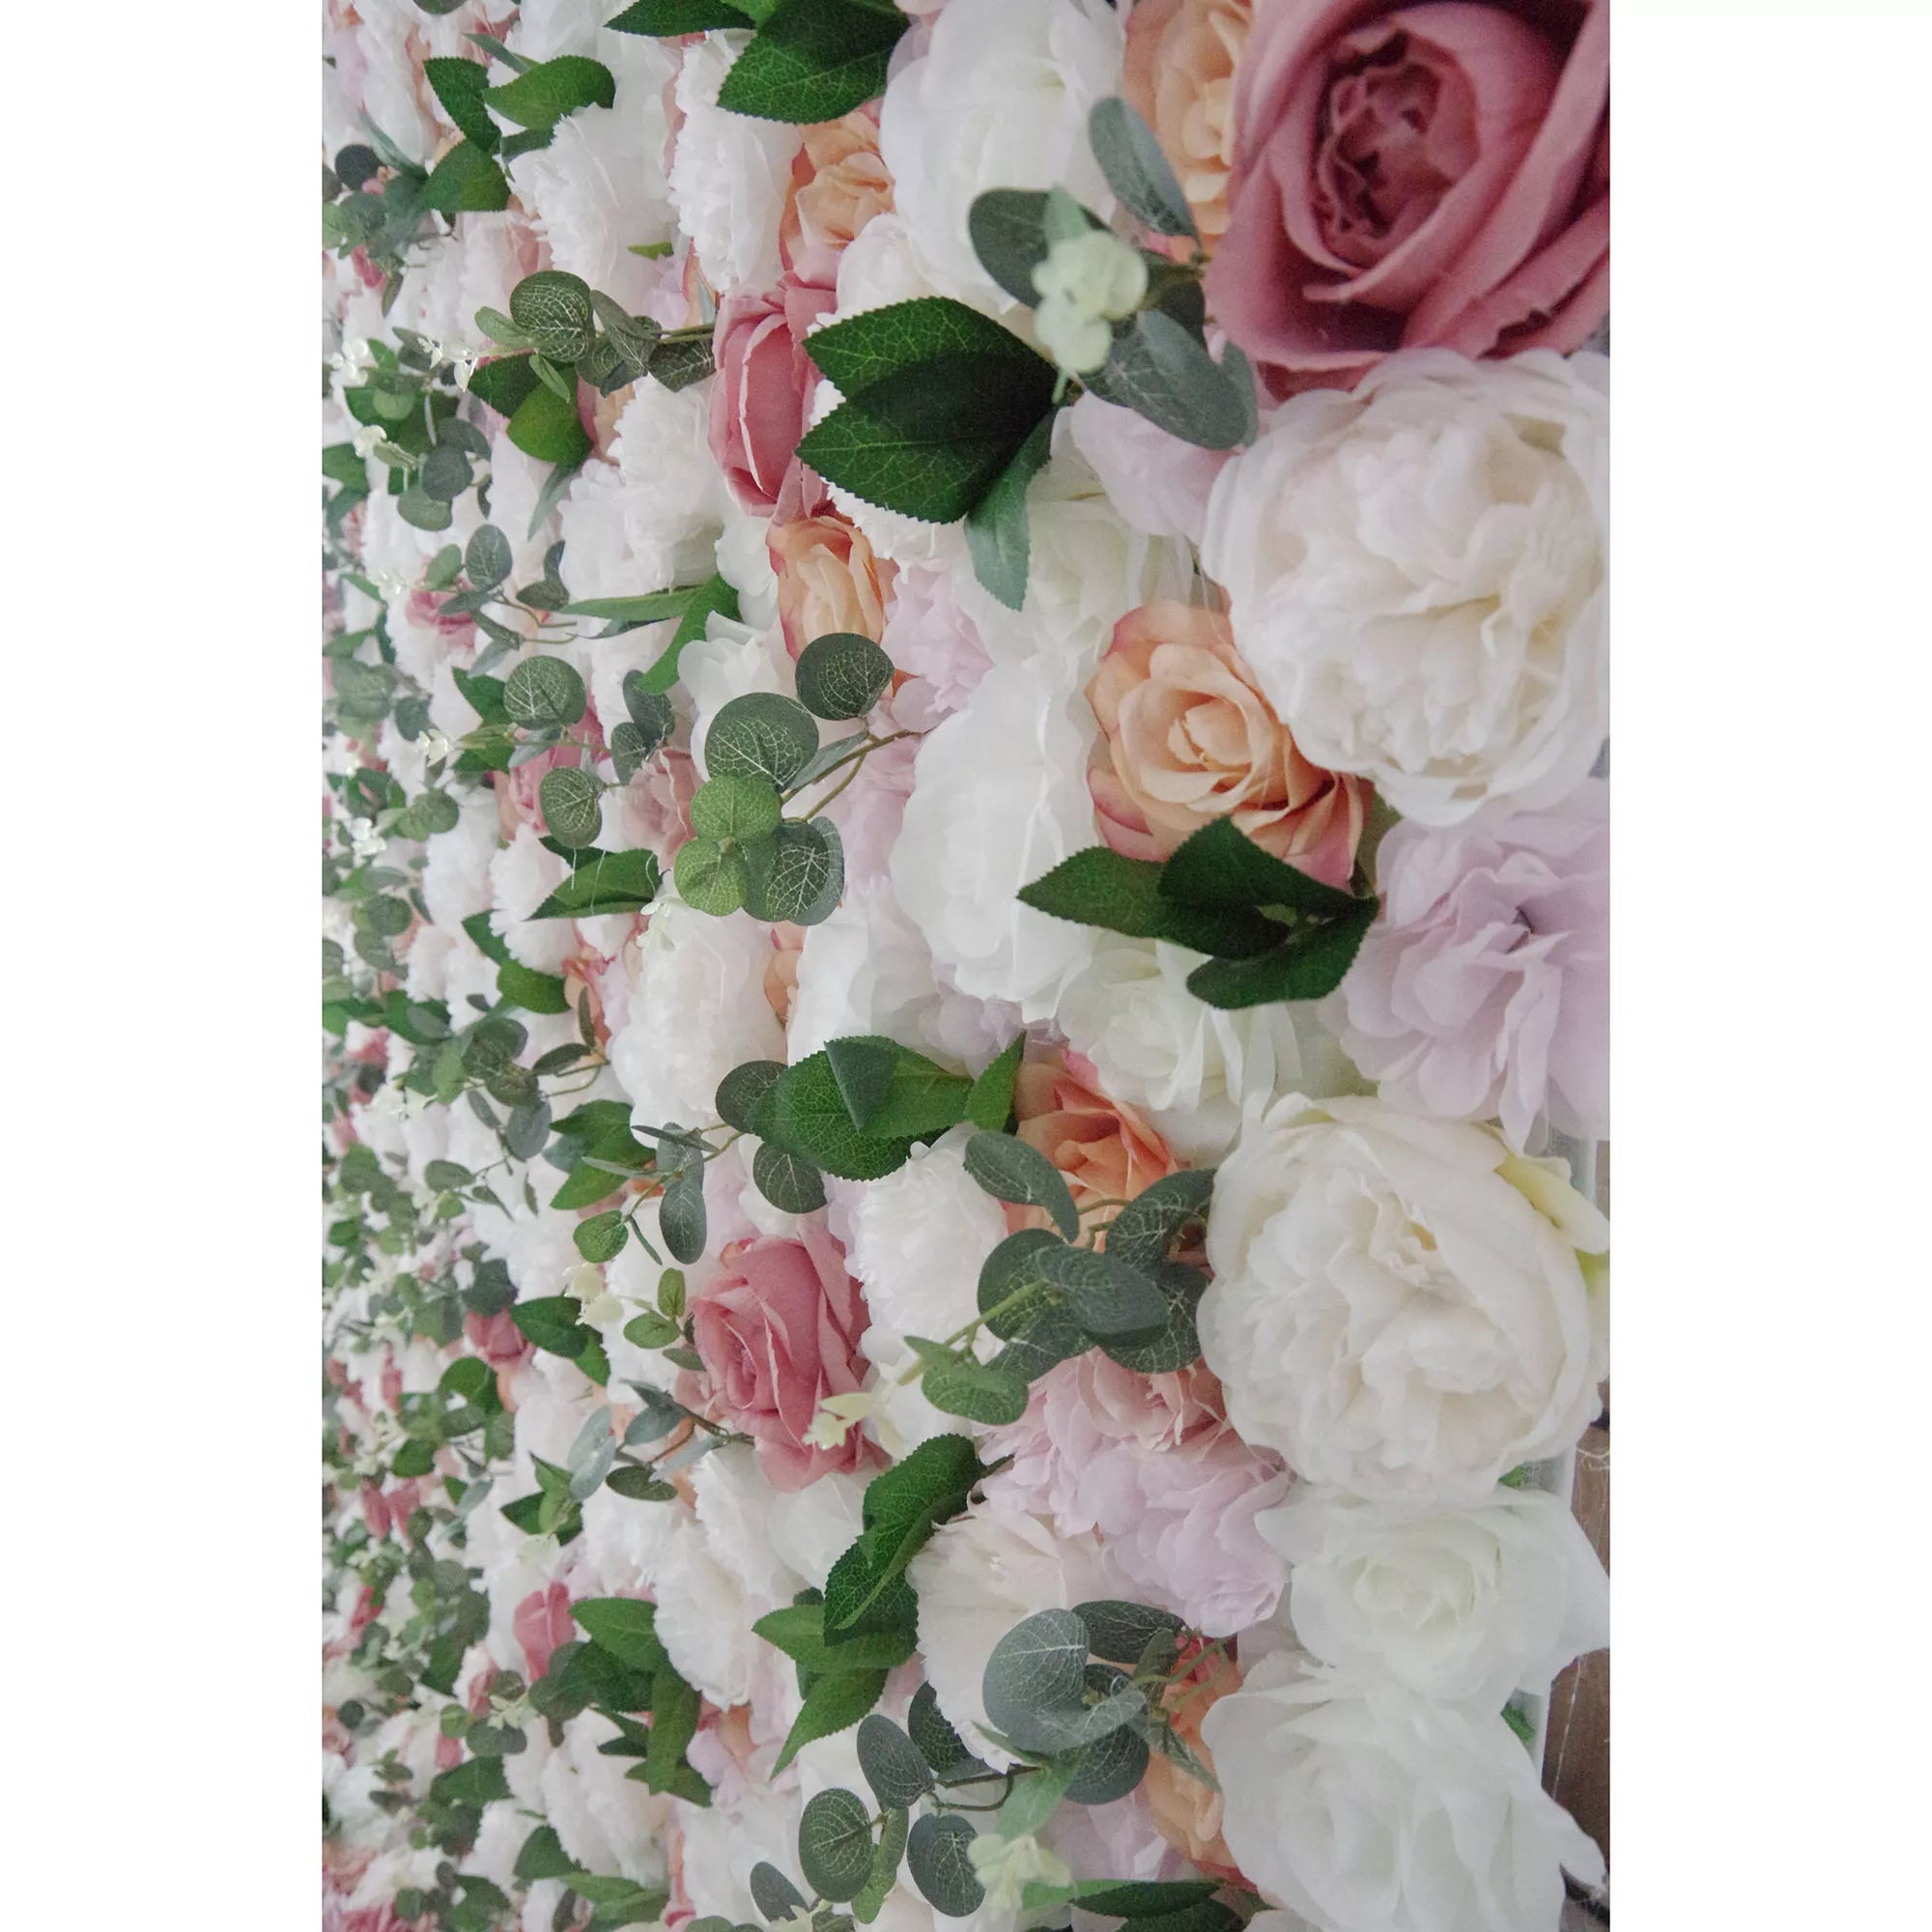 Valar Flowers artificial mixed white and pink roses with green leaves roll up fabric wall backdrop for weddings2